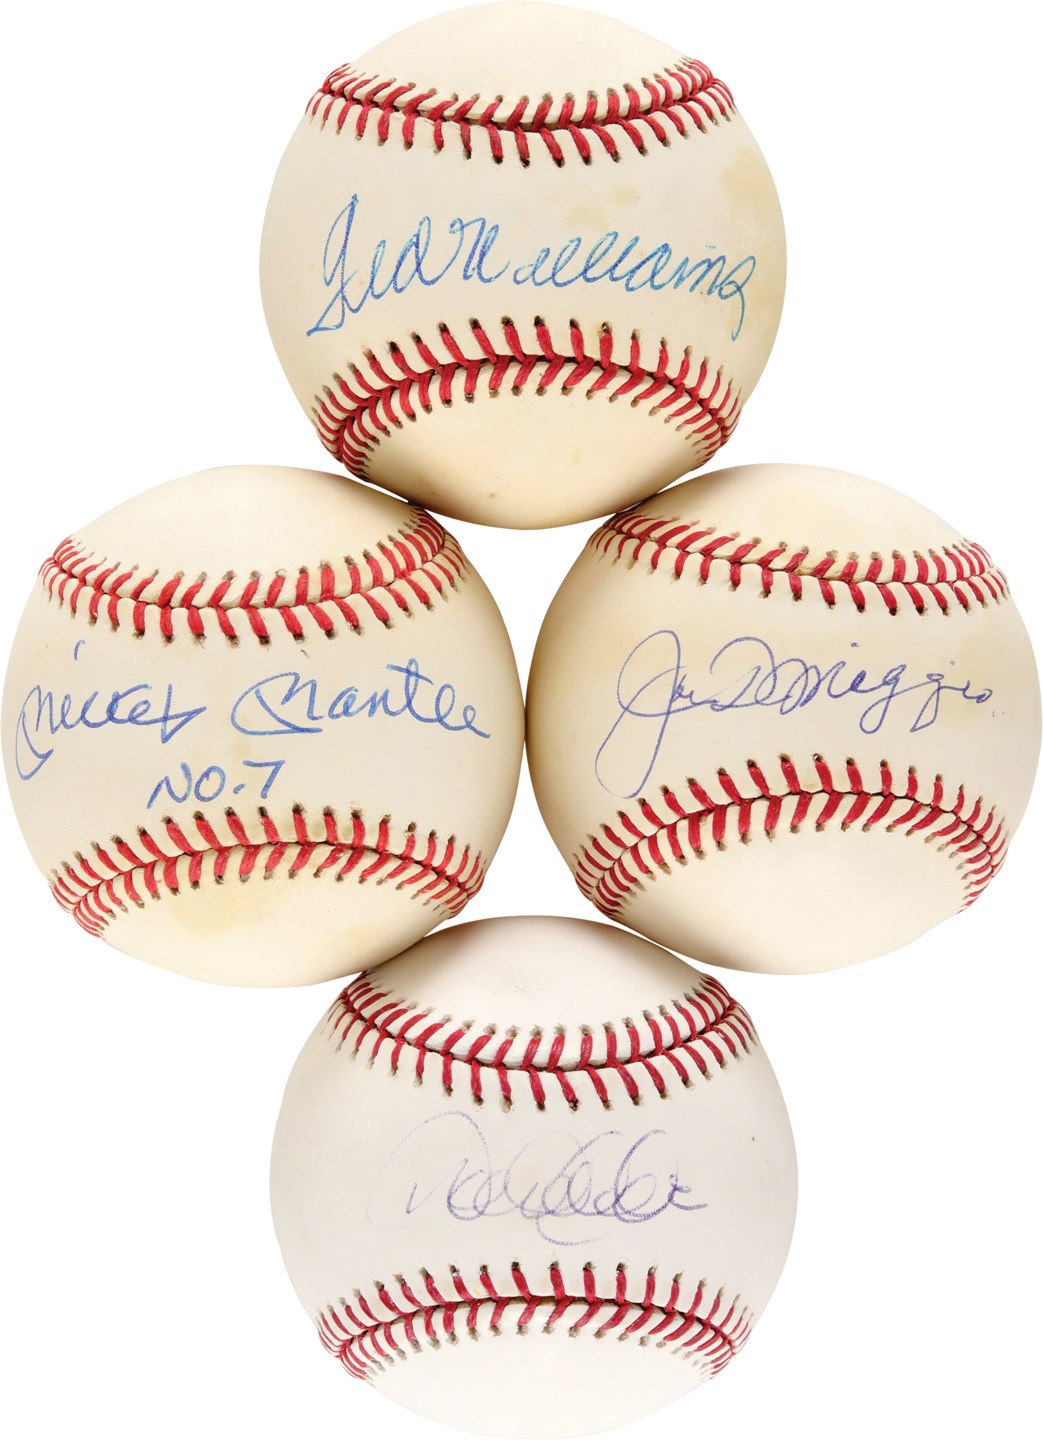 Signed Baseball Collection w/Mantle, DiMaggio, Williams, & Jeter (8)